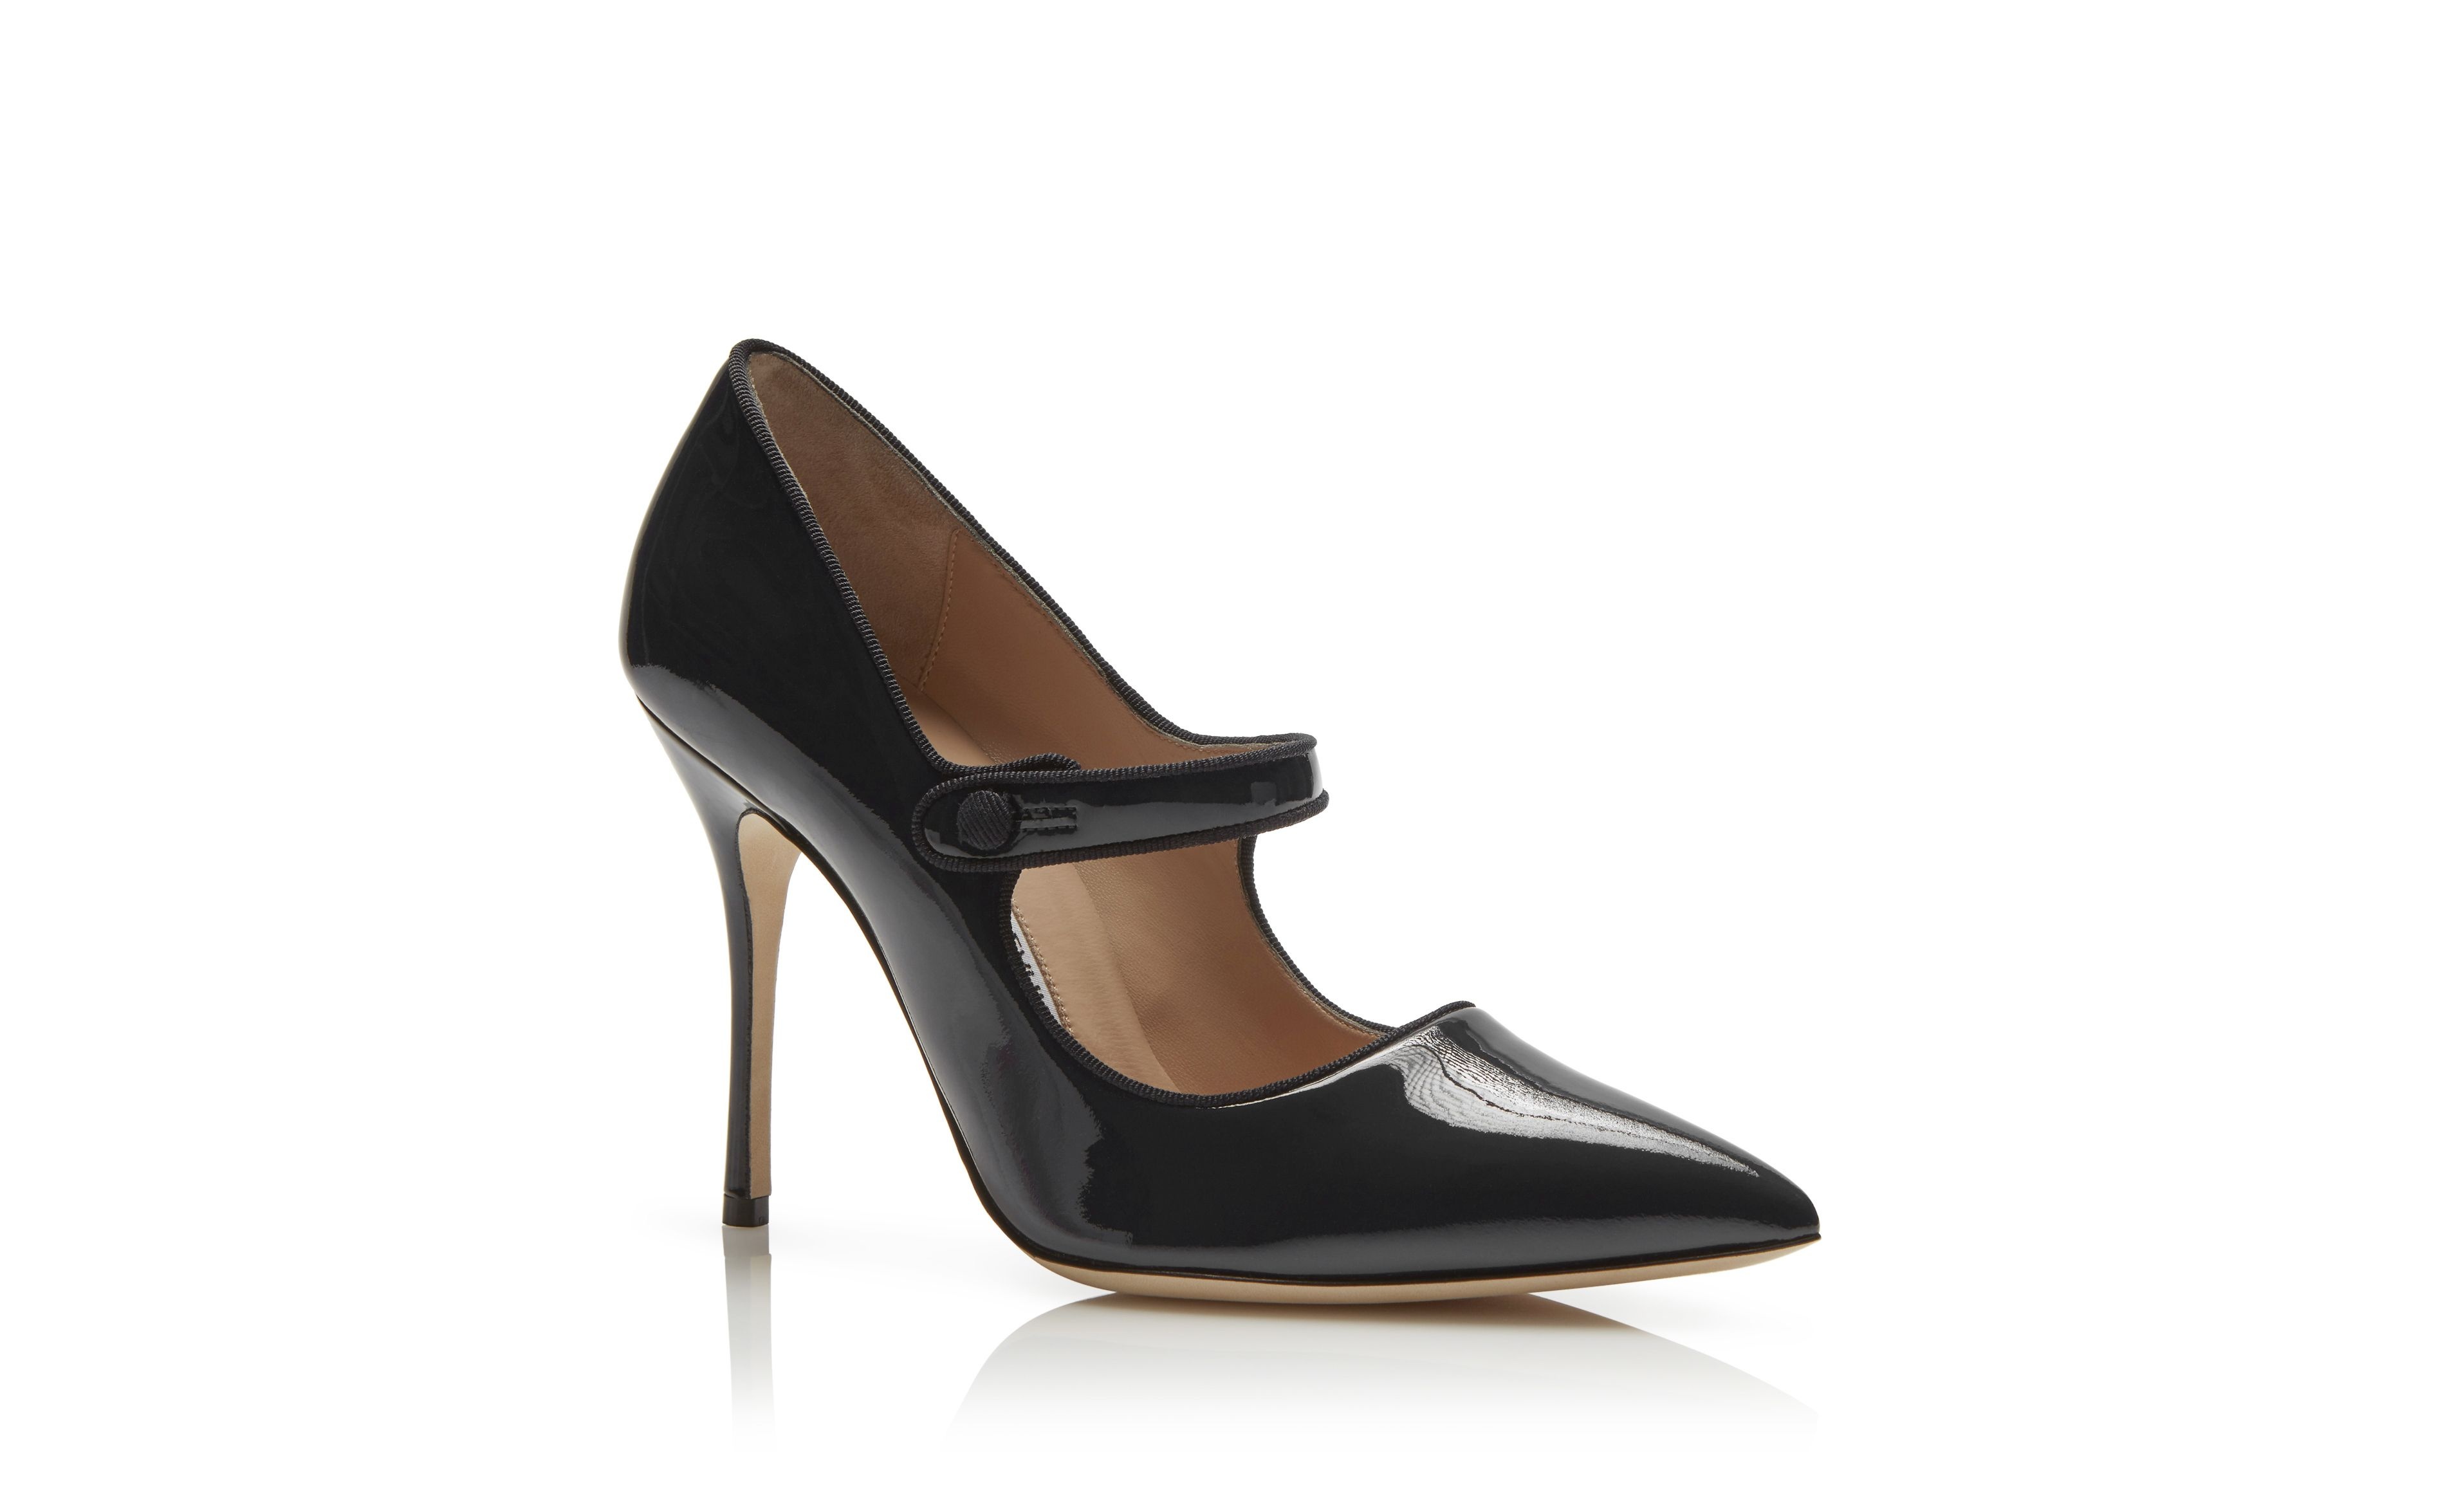 Black Patent Leather Pointed Toe Pumps - 3